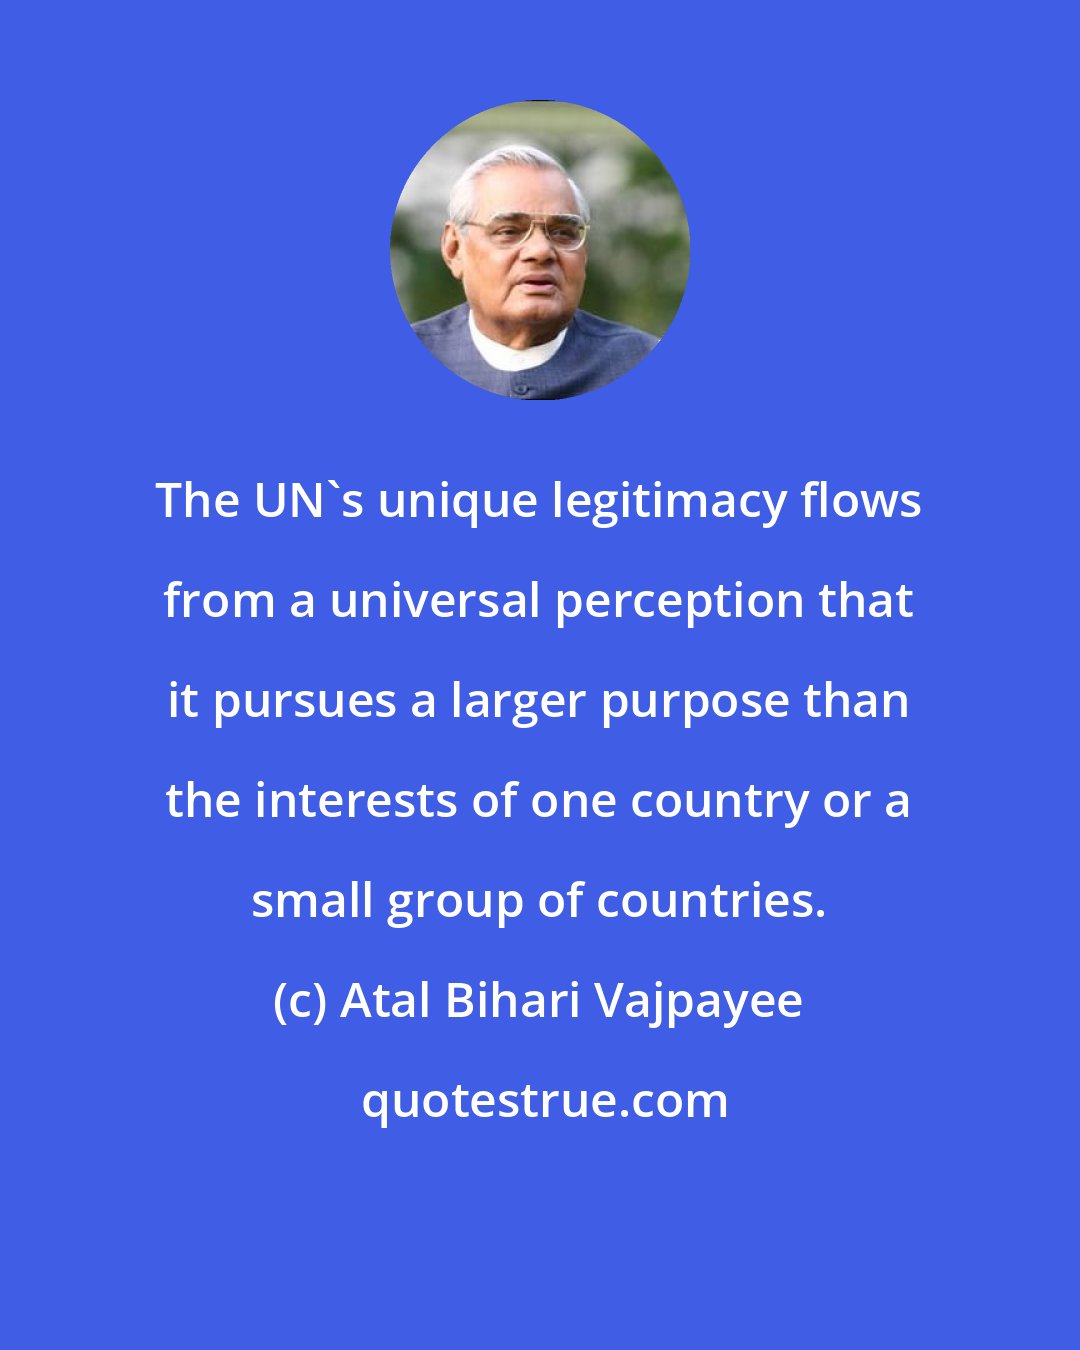 Atal Bihari Vajpayee: The UN's unique legitimacy flows from a universal perception that it pursues a larger purpose than the interests of one country or a small group of countries.